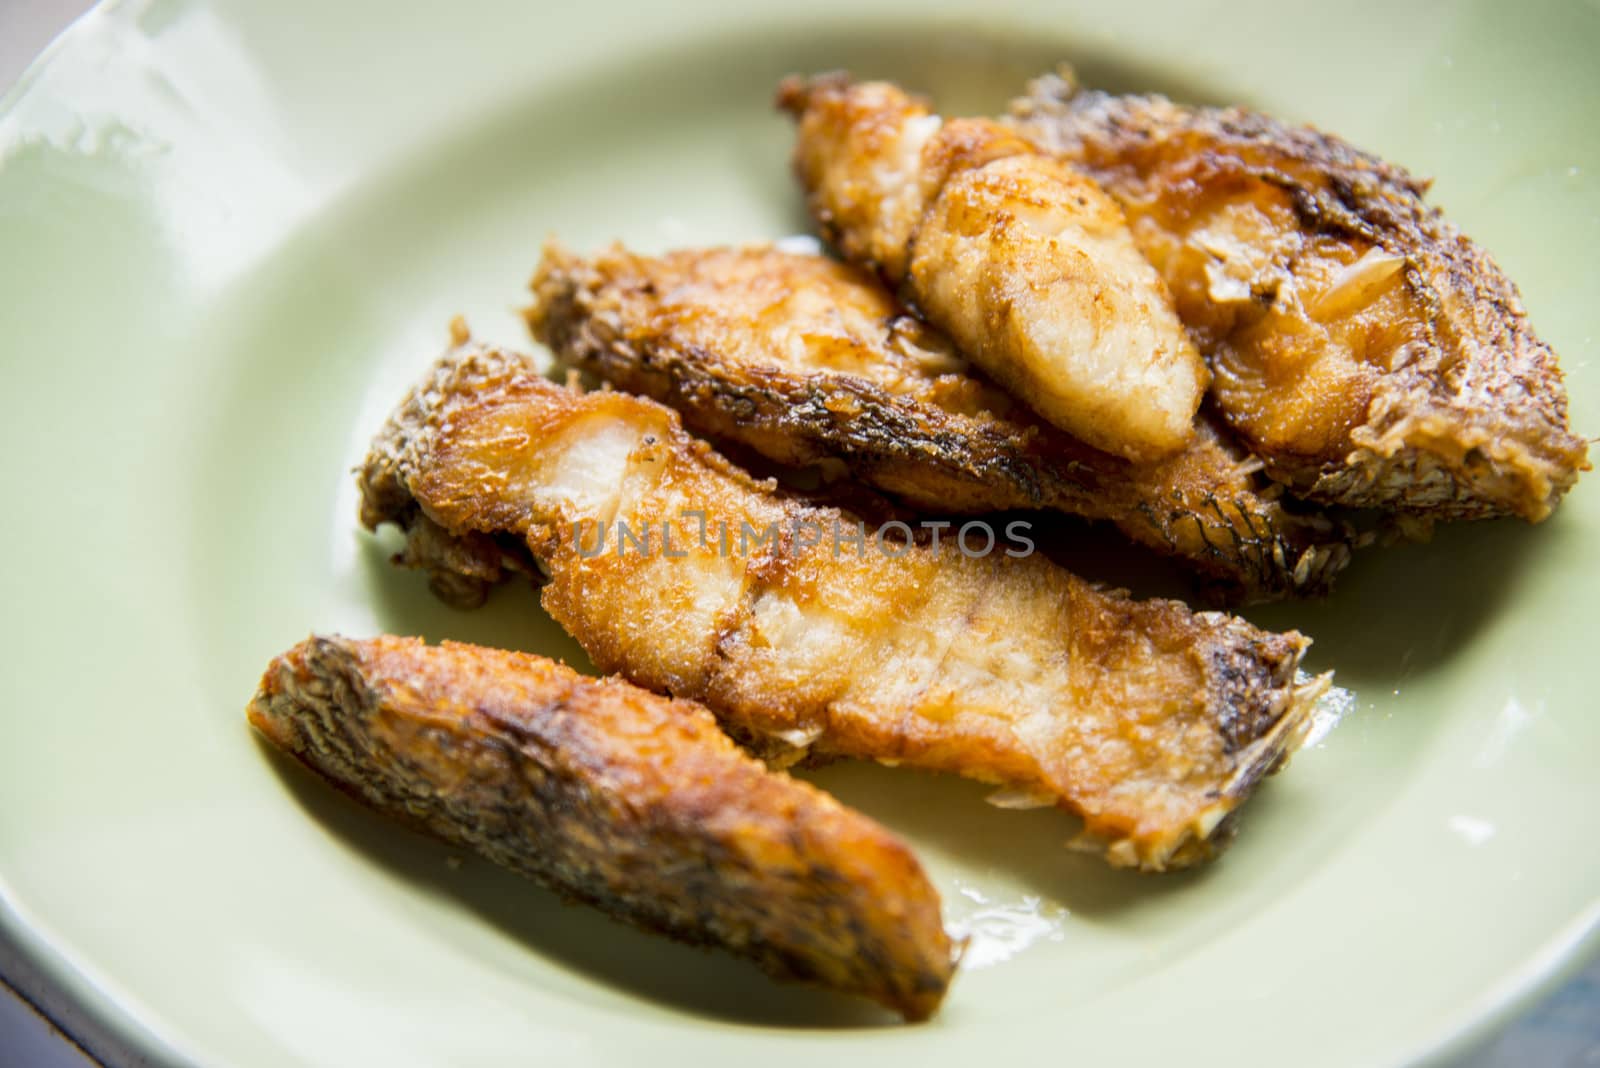 Pieces of fried fish in a dish